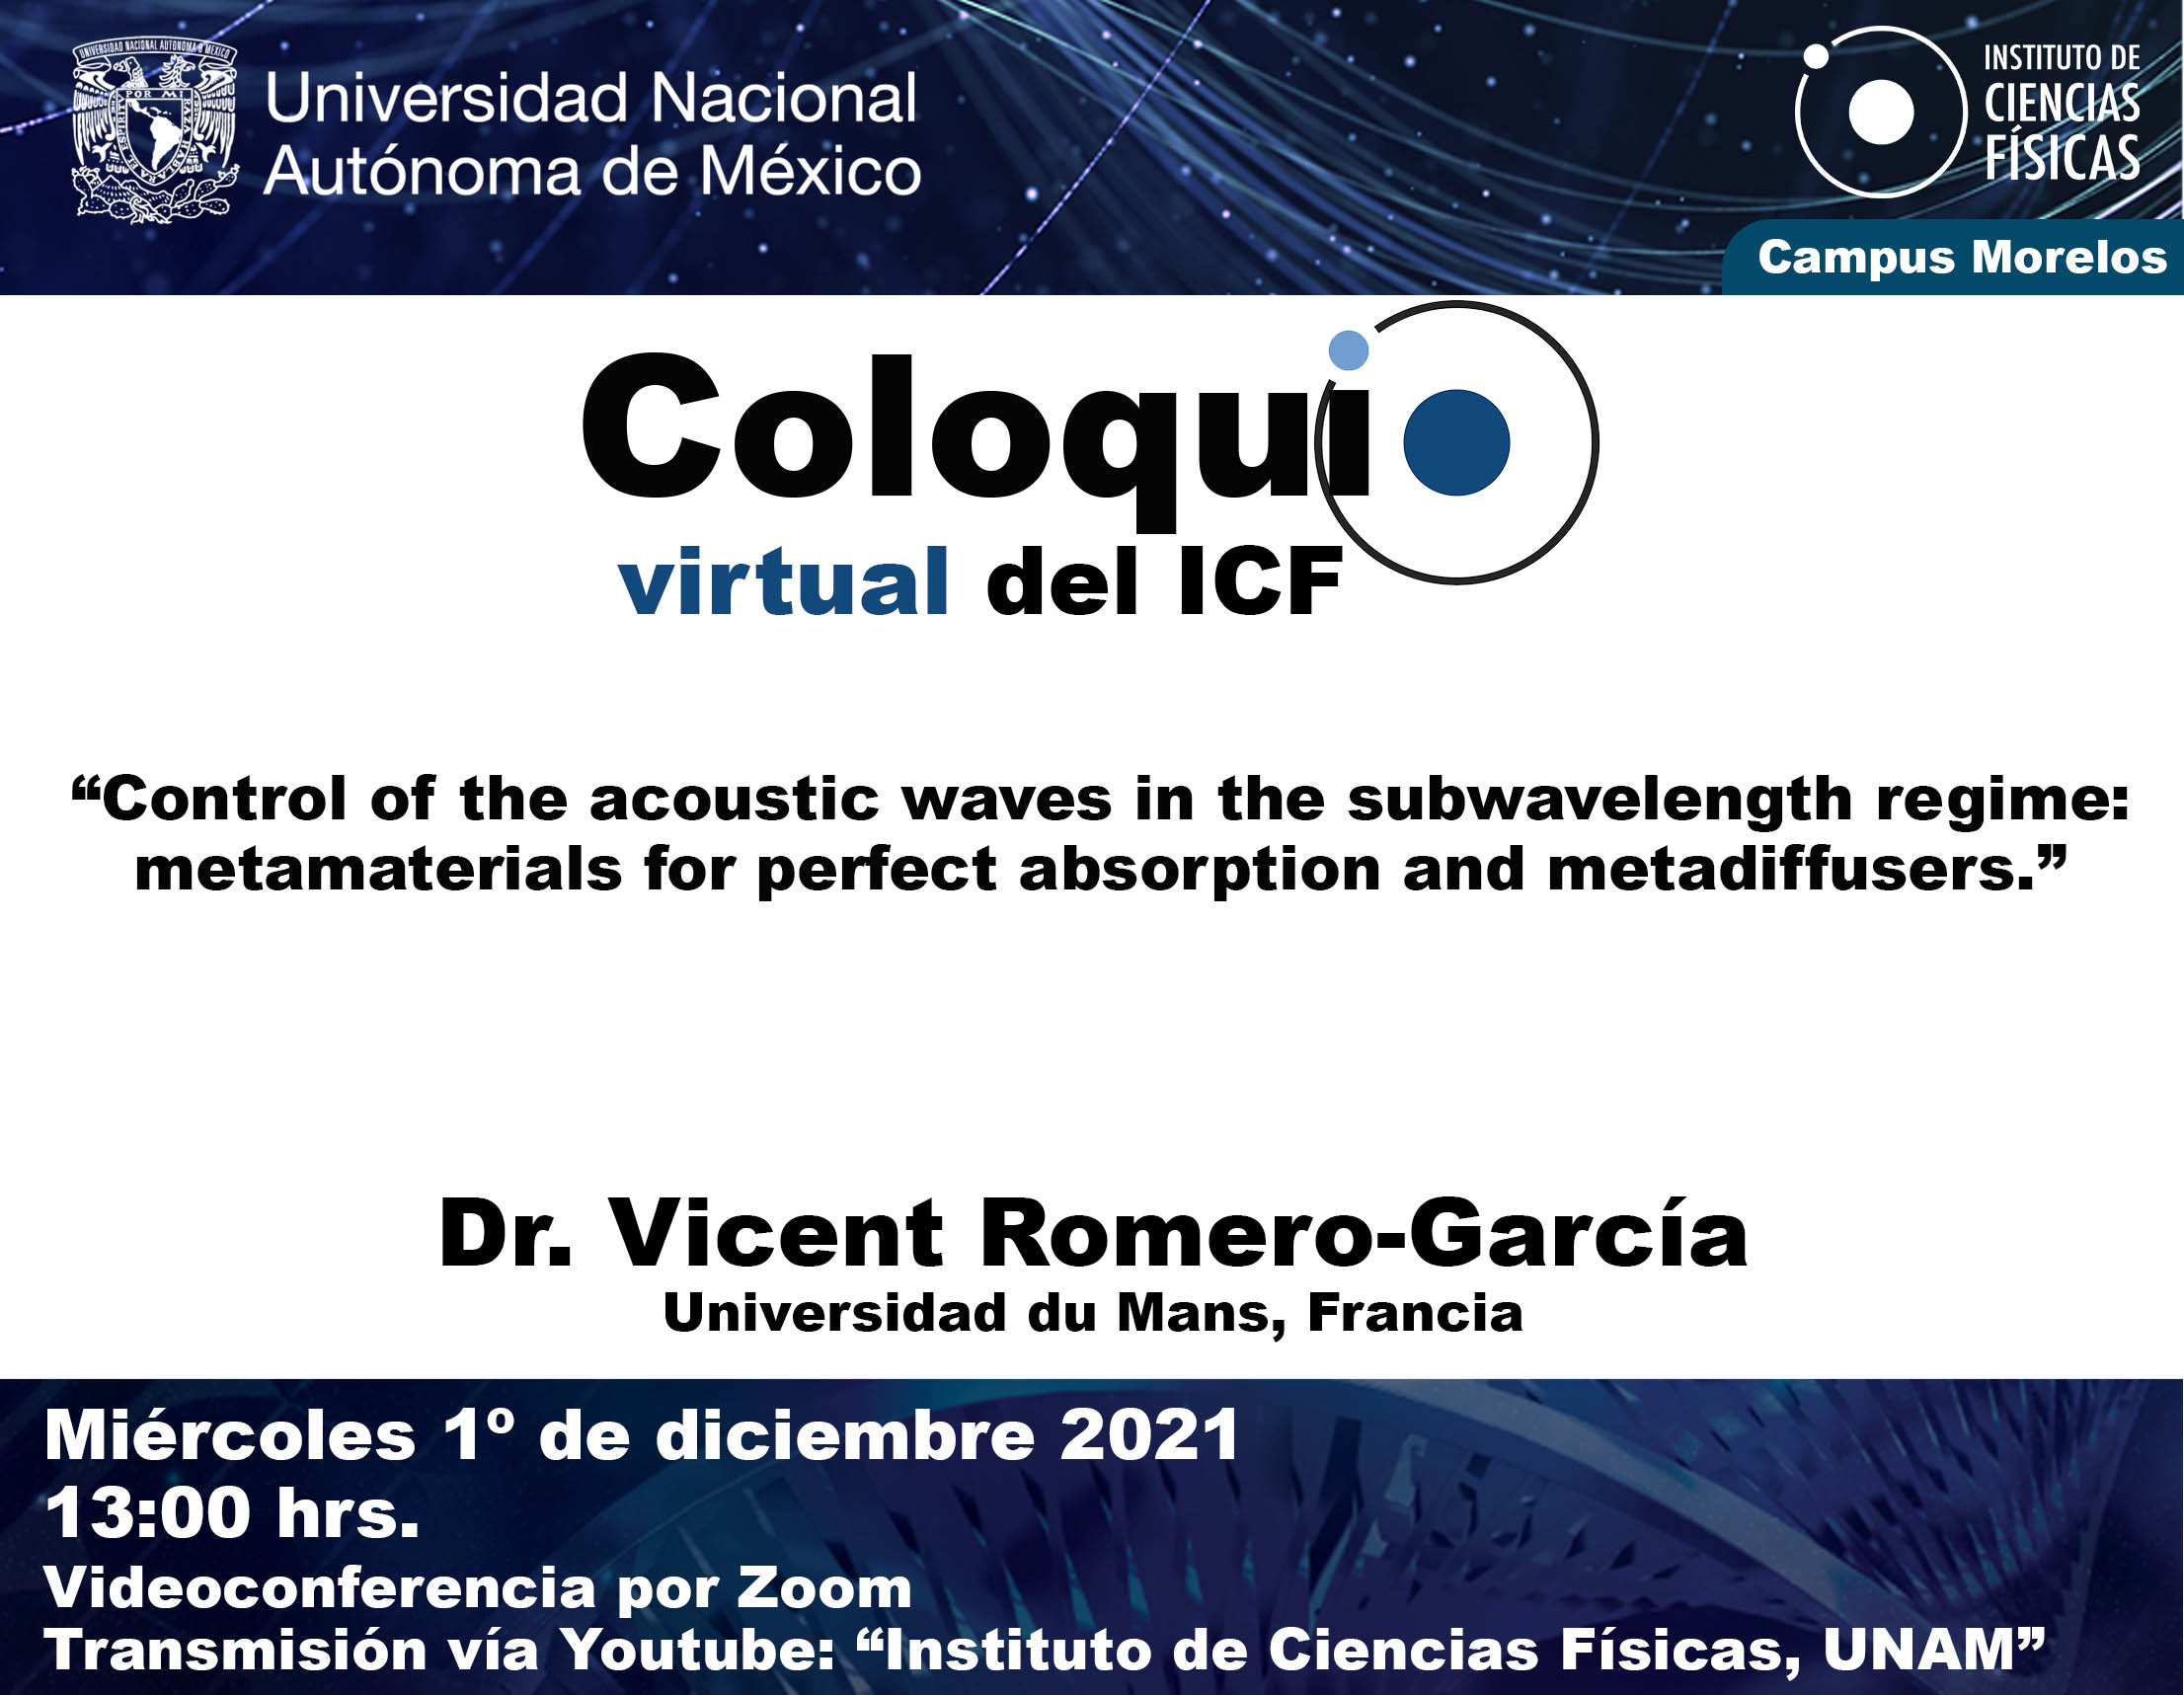 “Control of the acoustic waves in the subwavelength regime: metamaterials for perfect absorption and metadiffusers.”